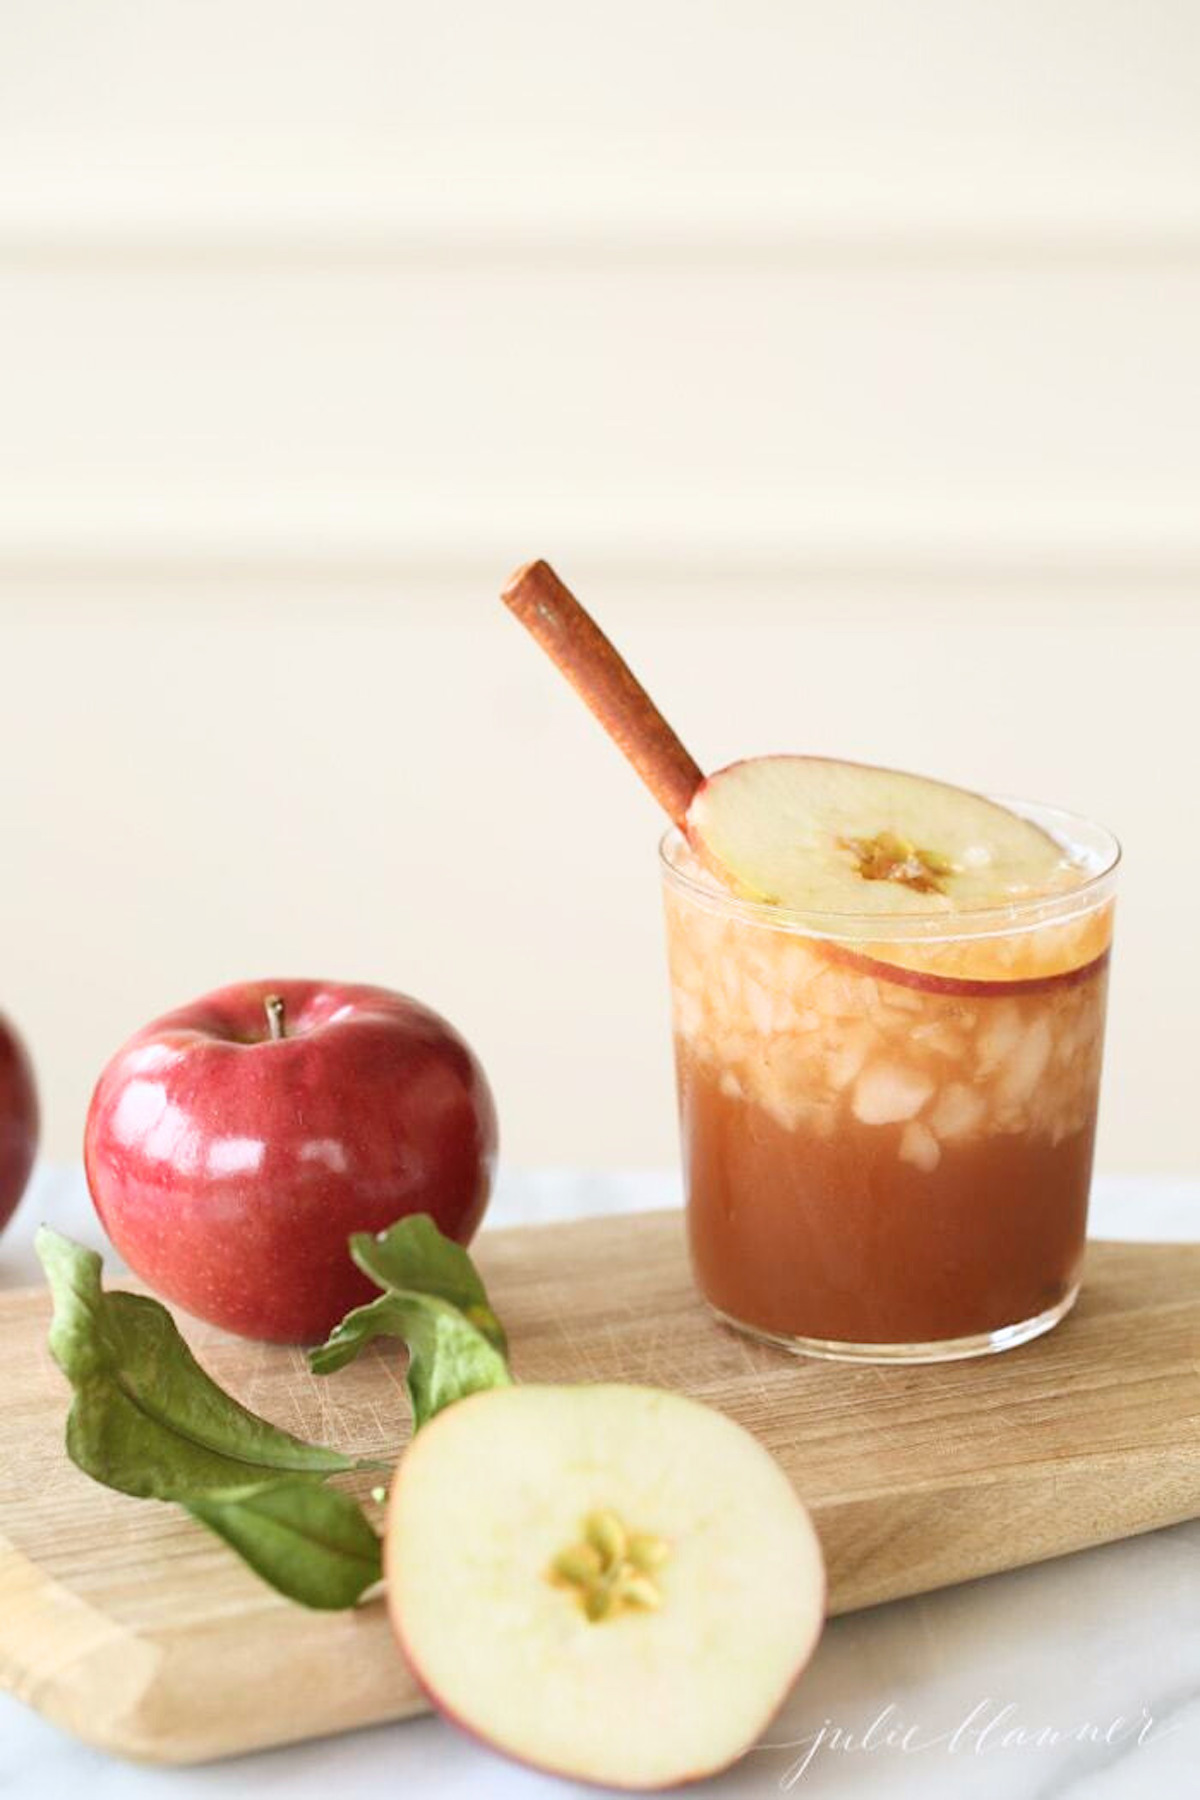 An apple butter old fashioned in a clear glass, apples and a wooden cutting board nearby.